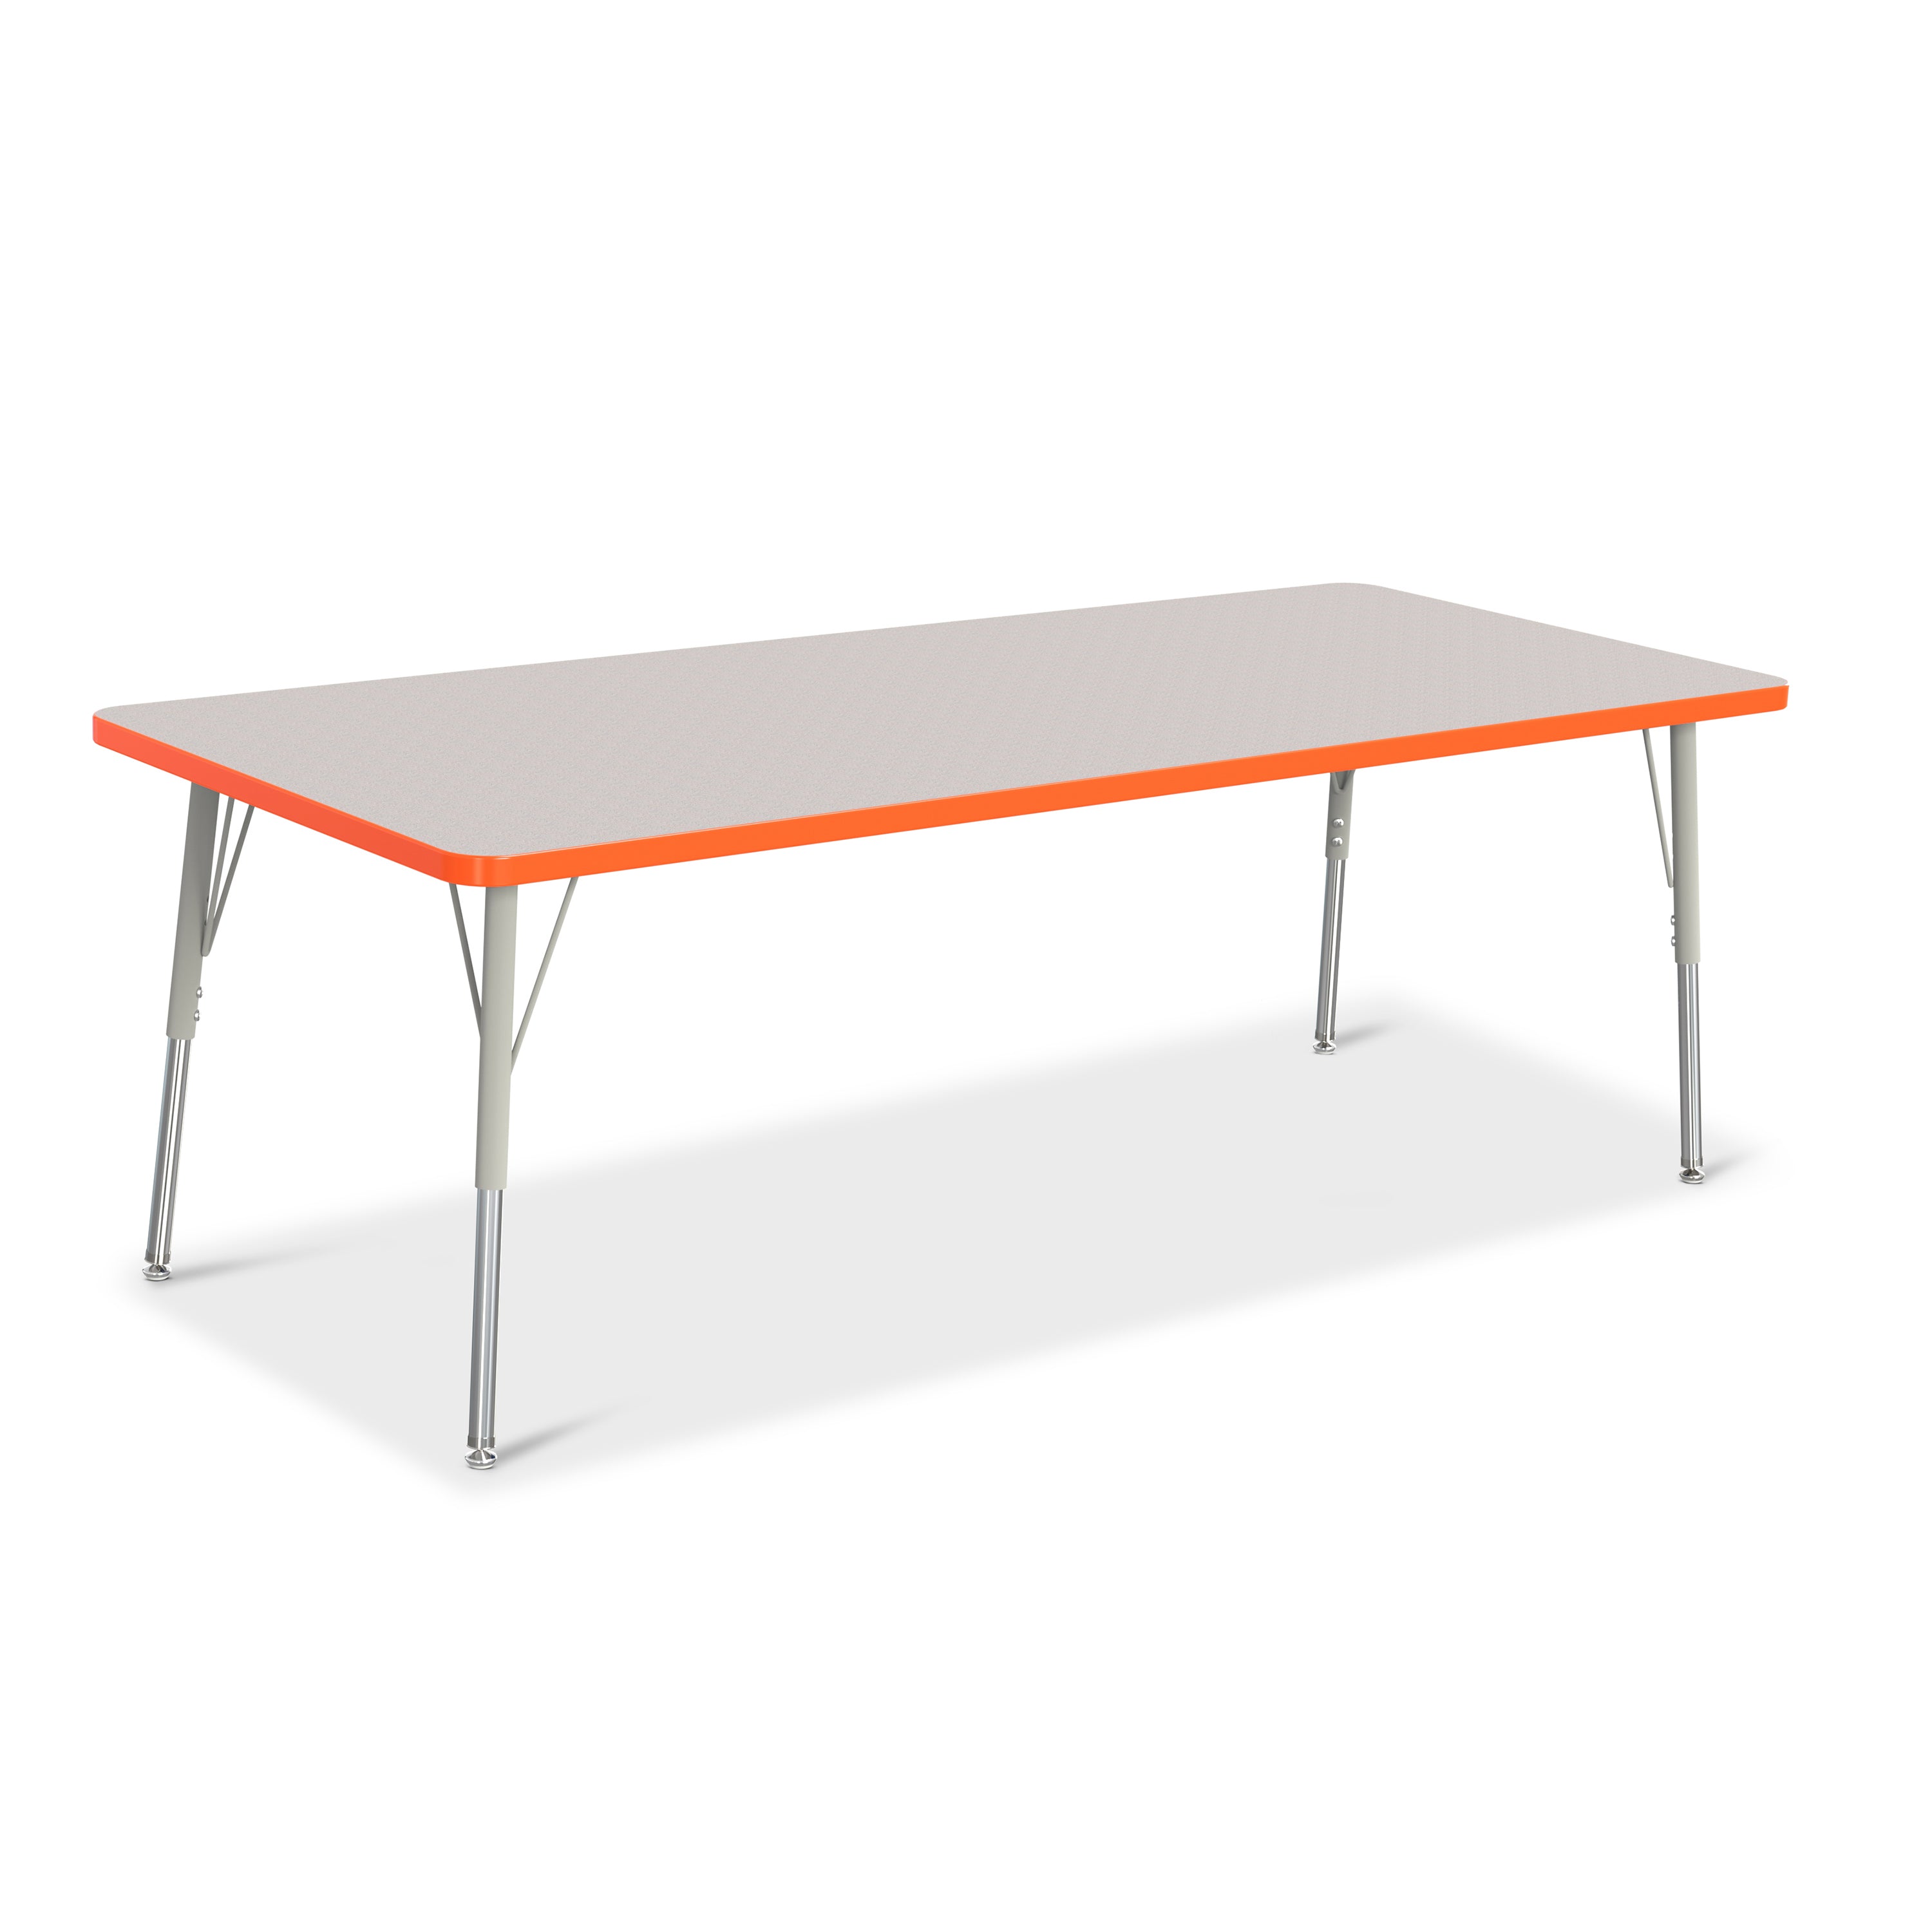 6413JCA114, Berries Rectangle Activity Table - 30" X 72", A-height - Freckled Gray/Orange/Gray